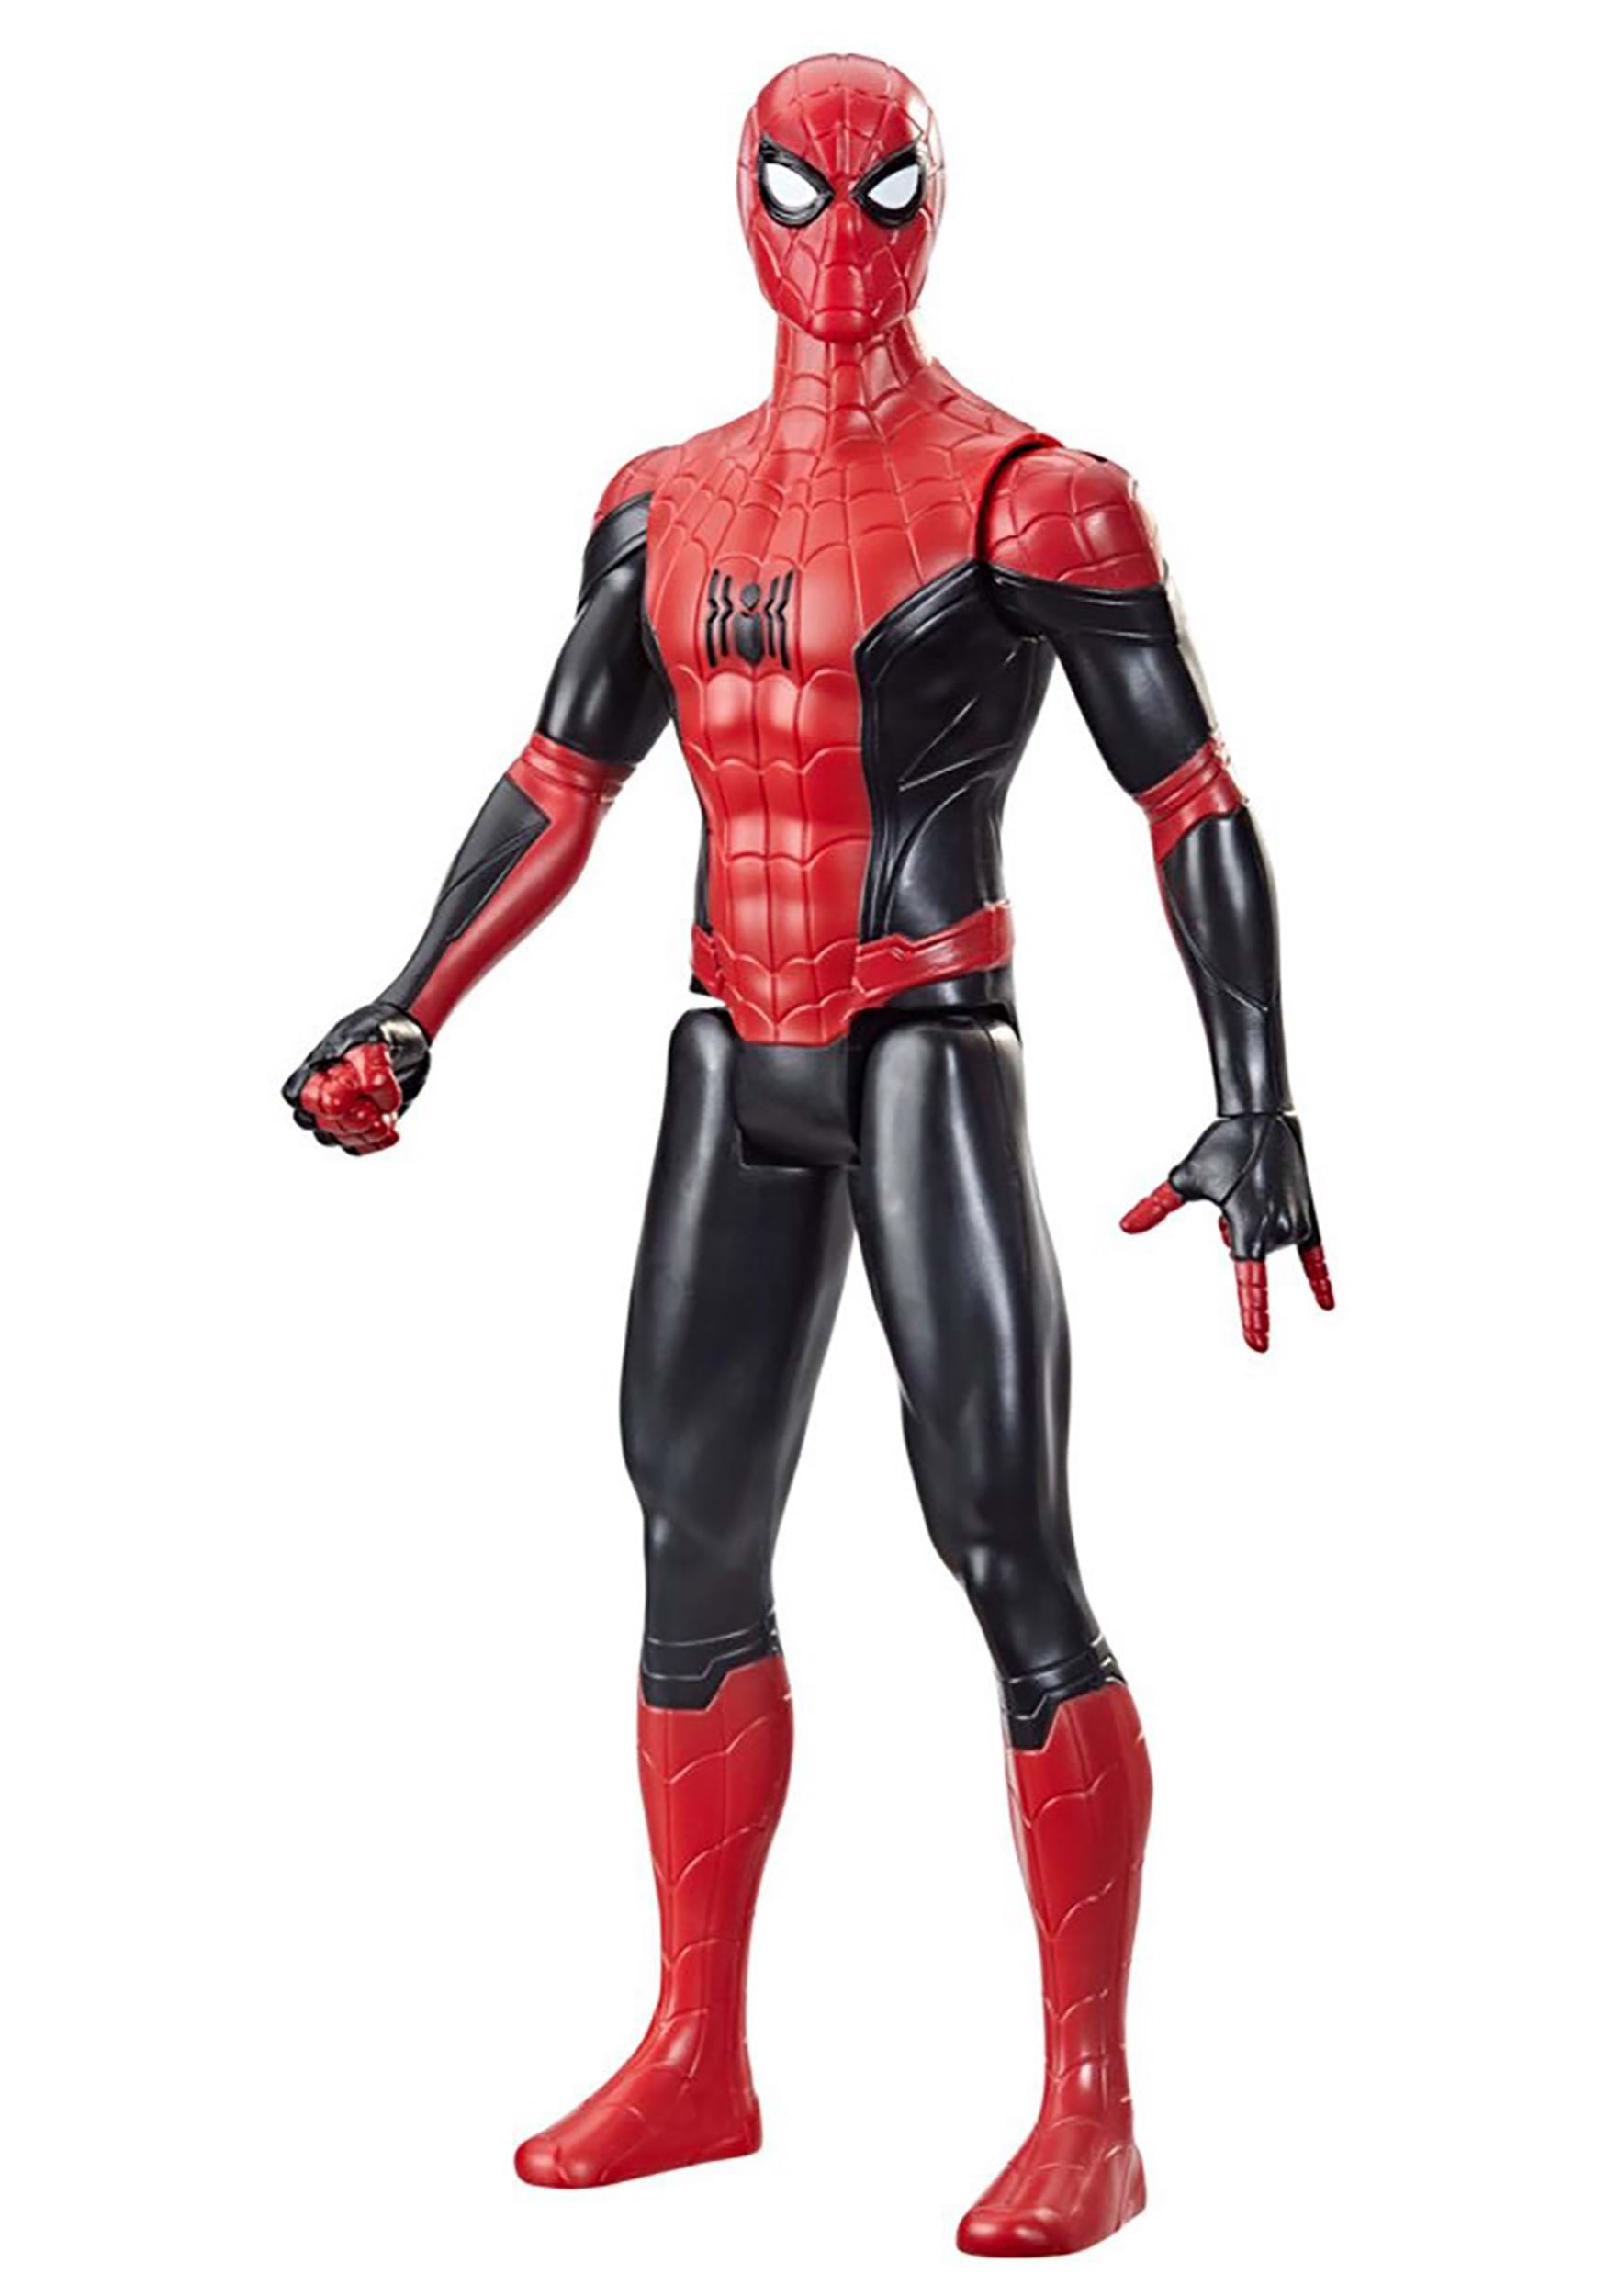 Spider-Man Titan Hero Series Black and Red Suit 12in Action Figure